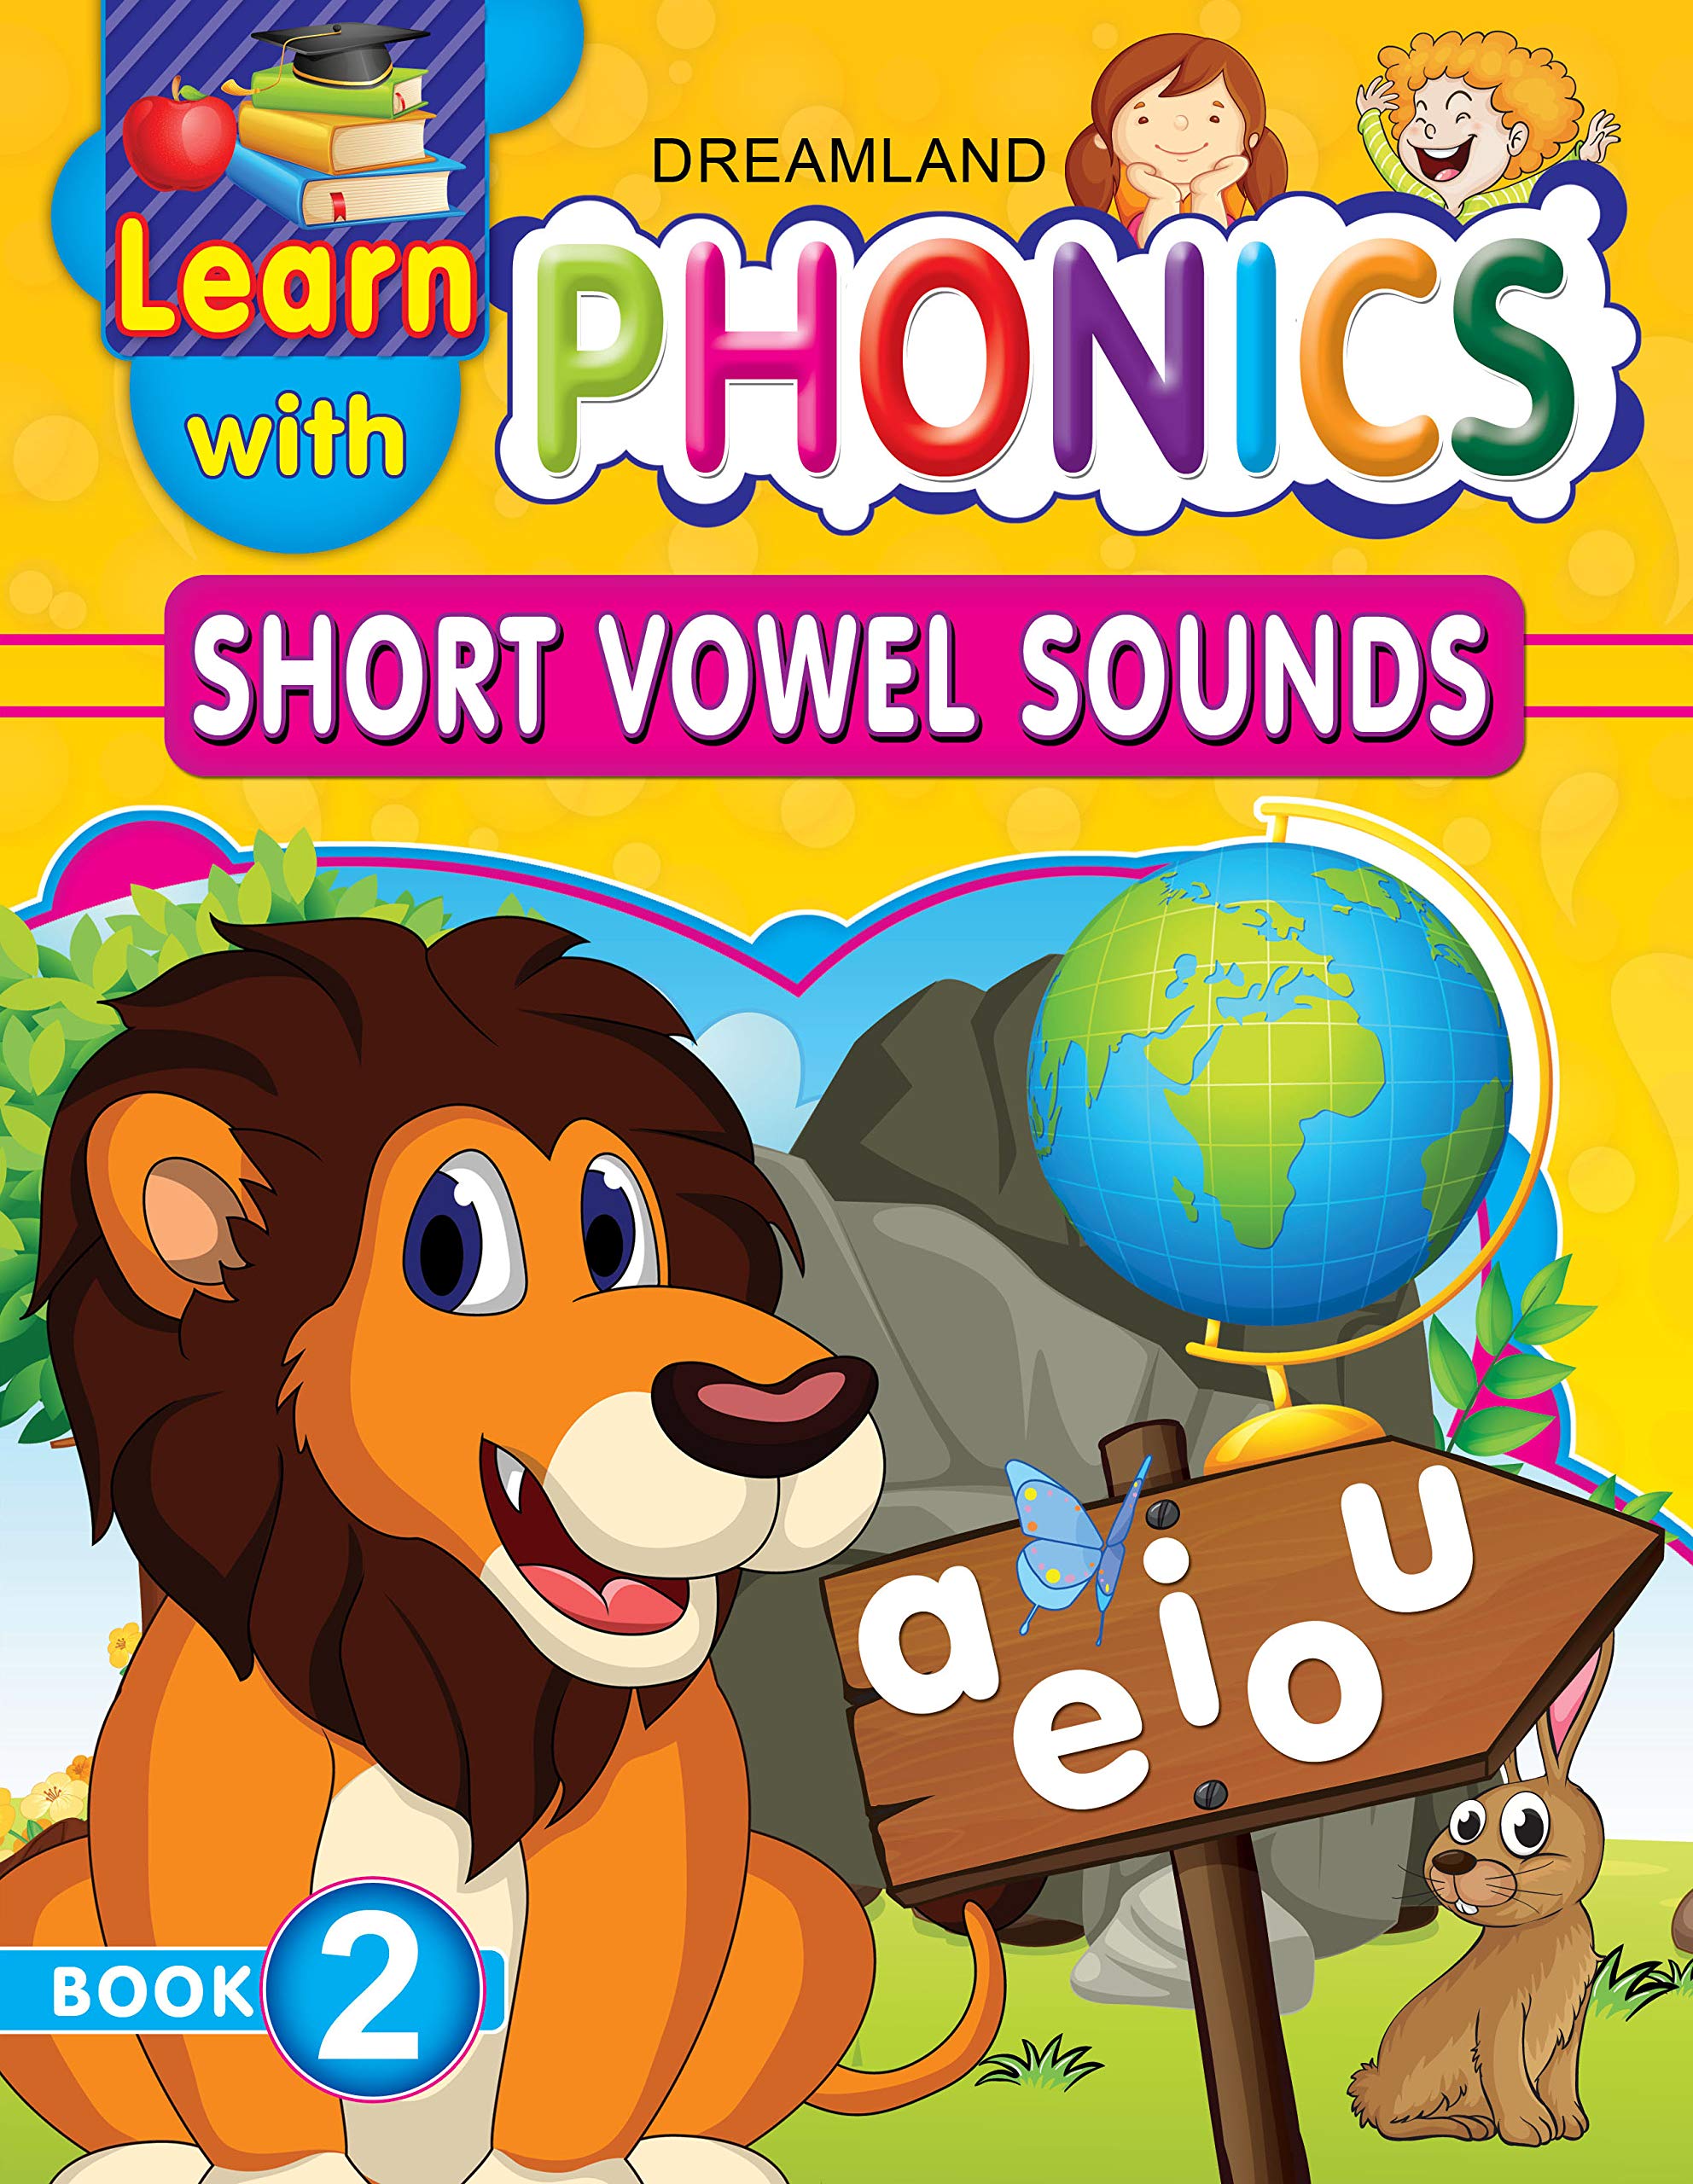 Learn with Phonics (Short Vowel Sounds)